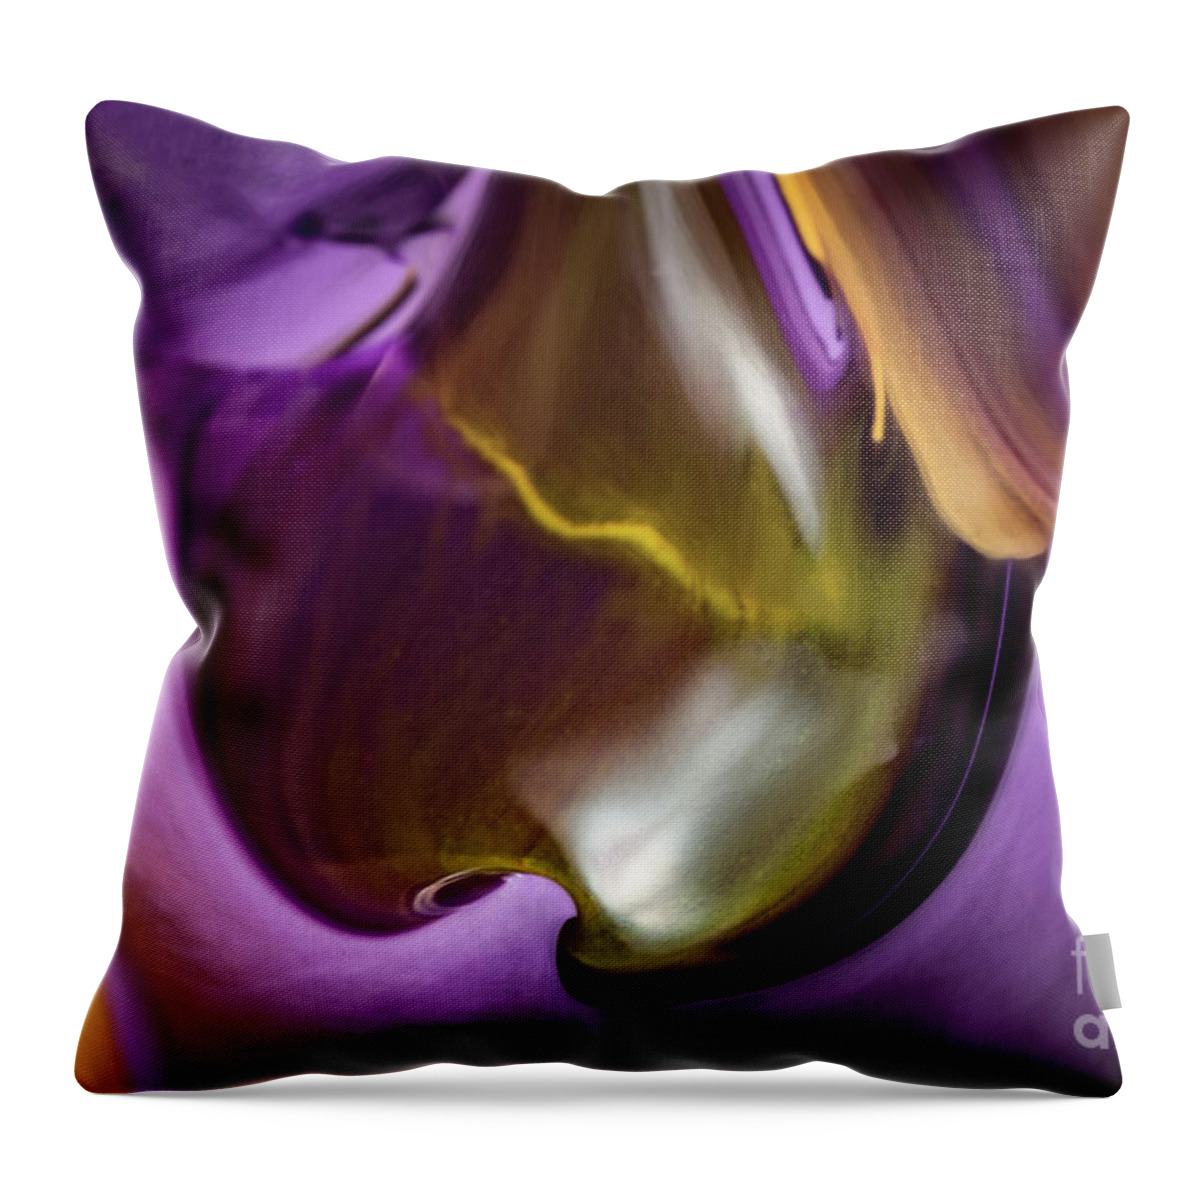 Abstract Throw Pillow featuring the photograph Purple Haze by Patti Schulze